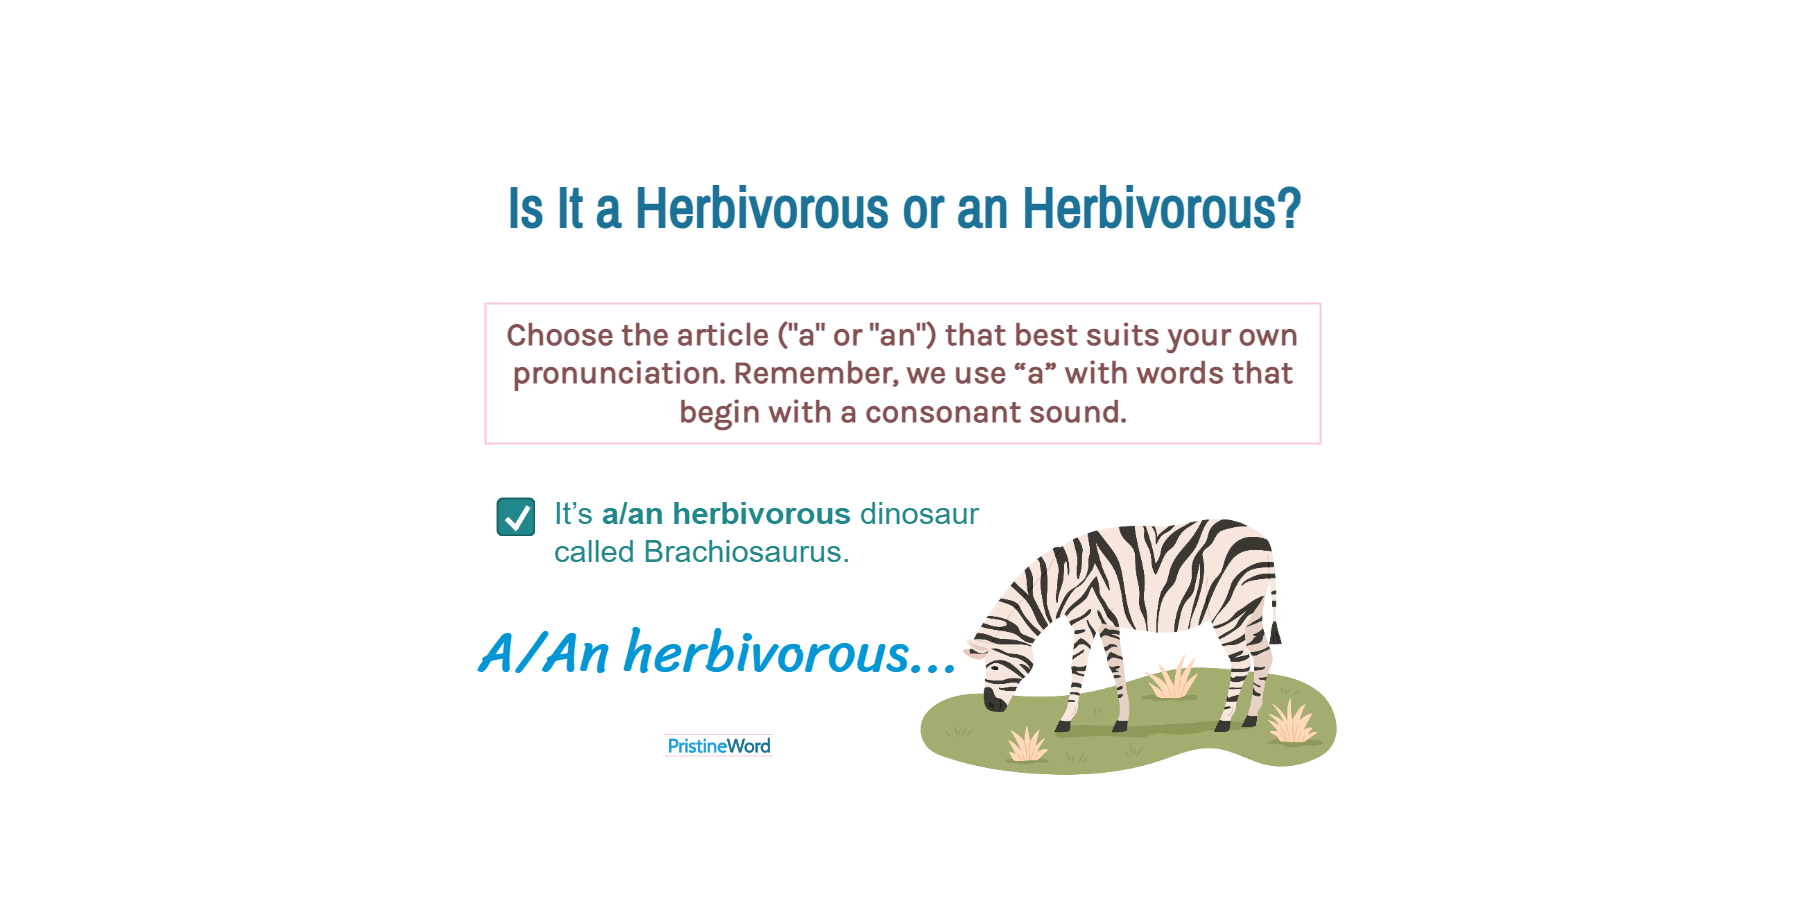 Is It a Herbivorous or an Herbivorous?